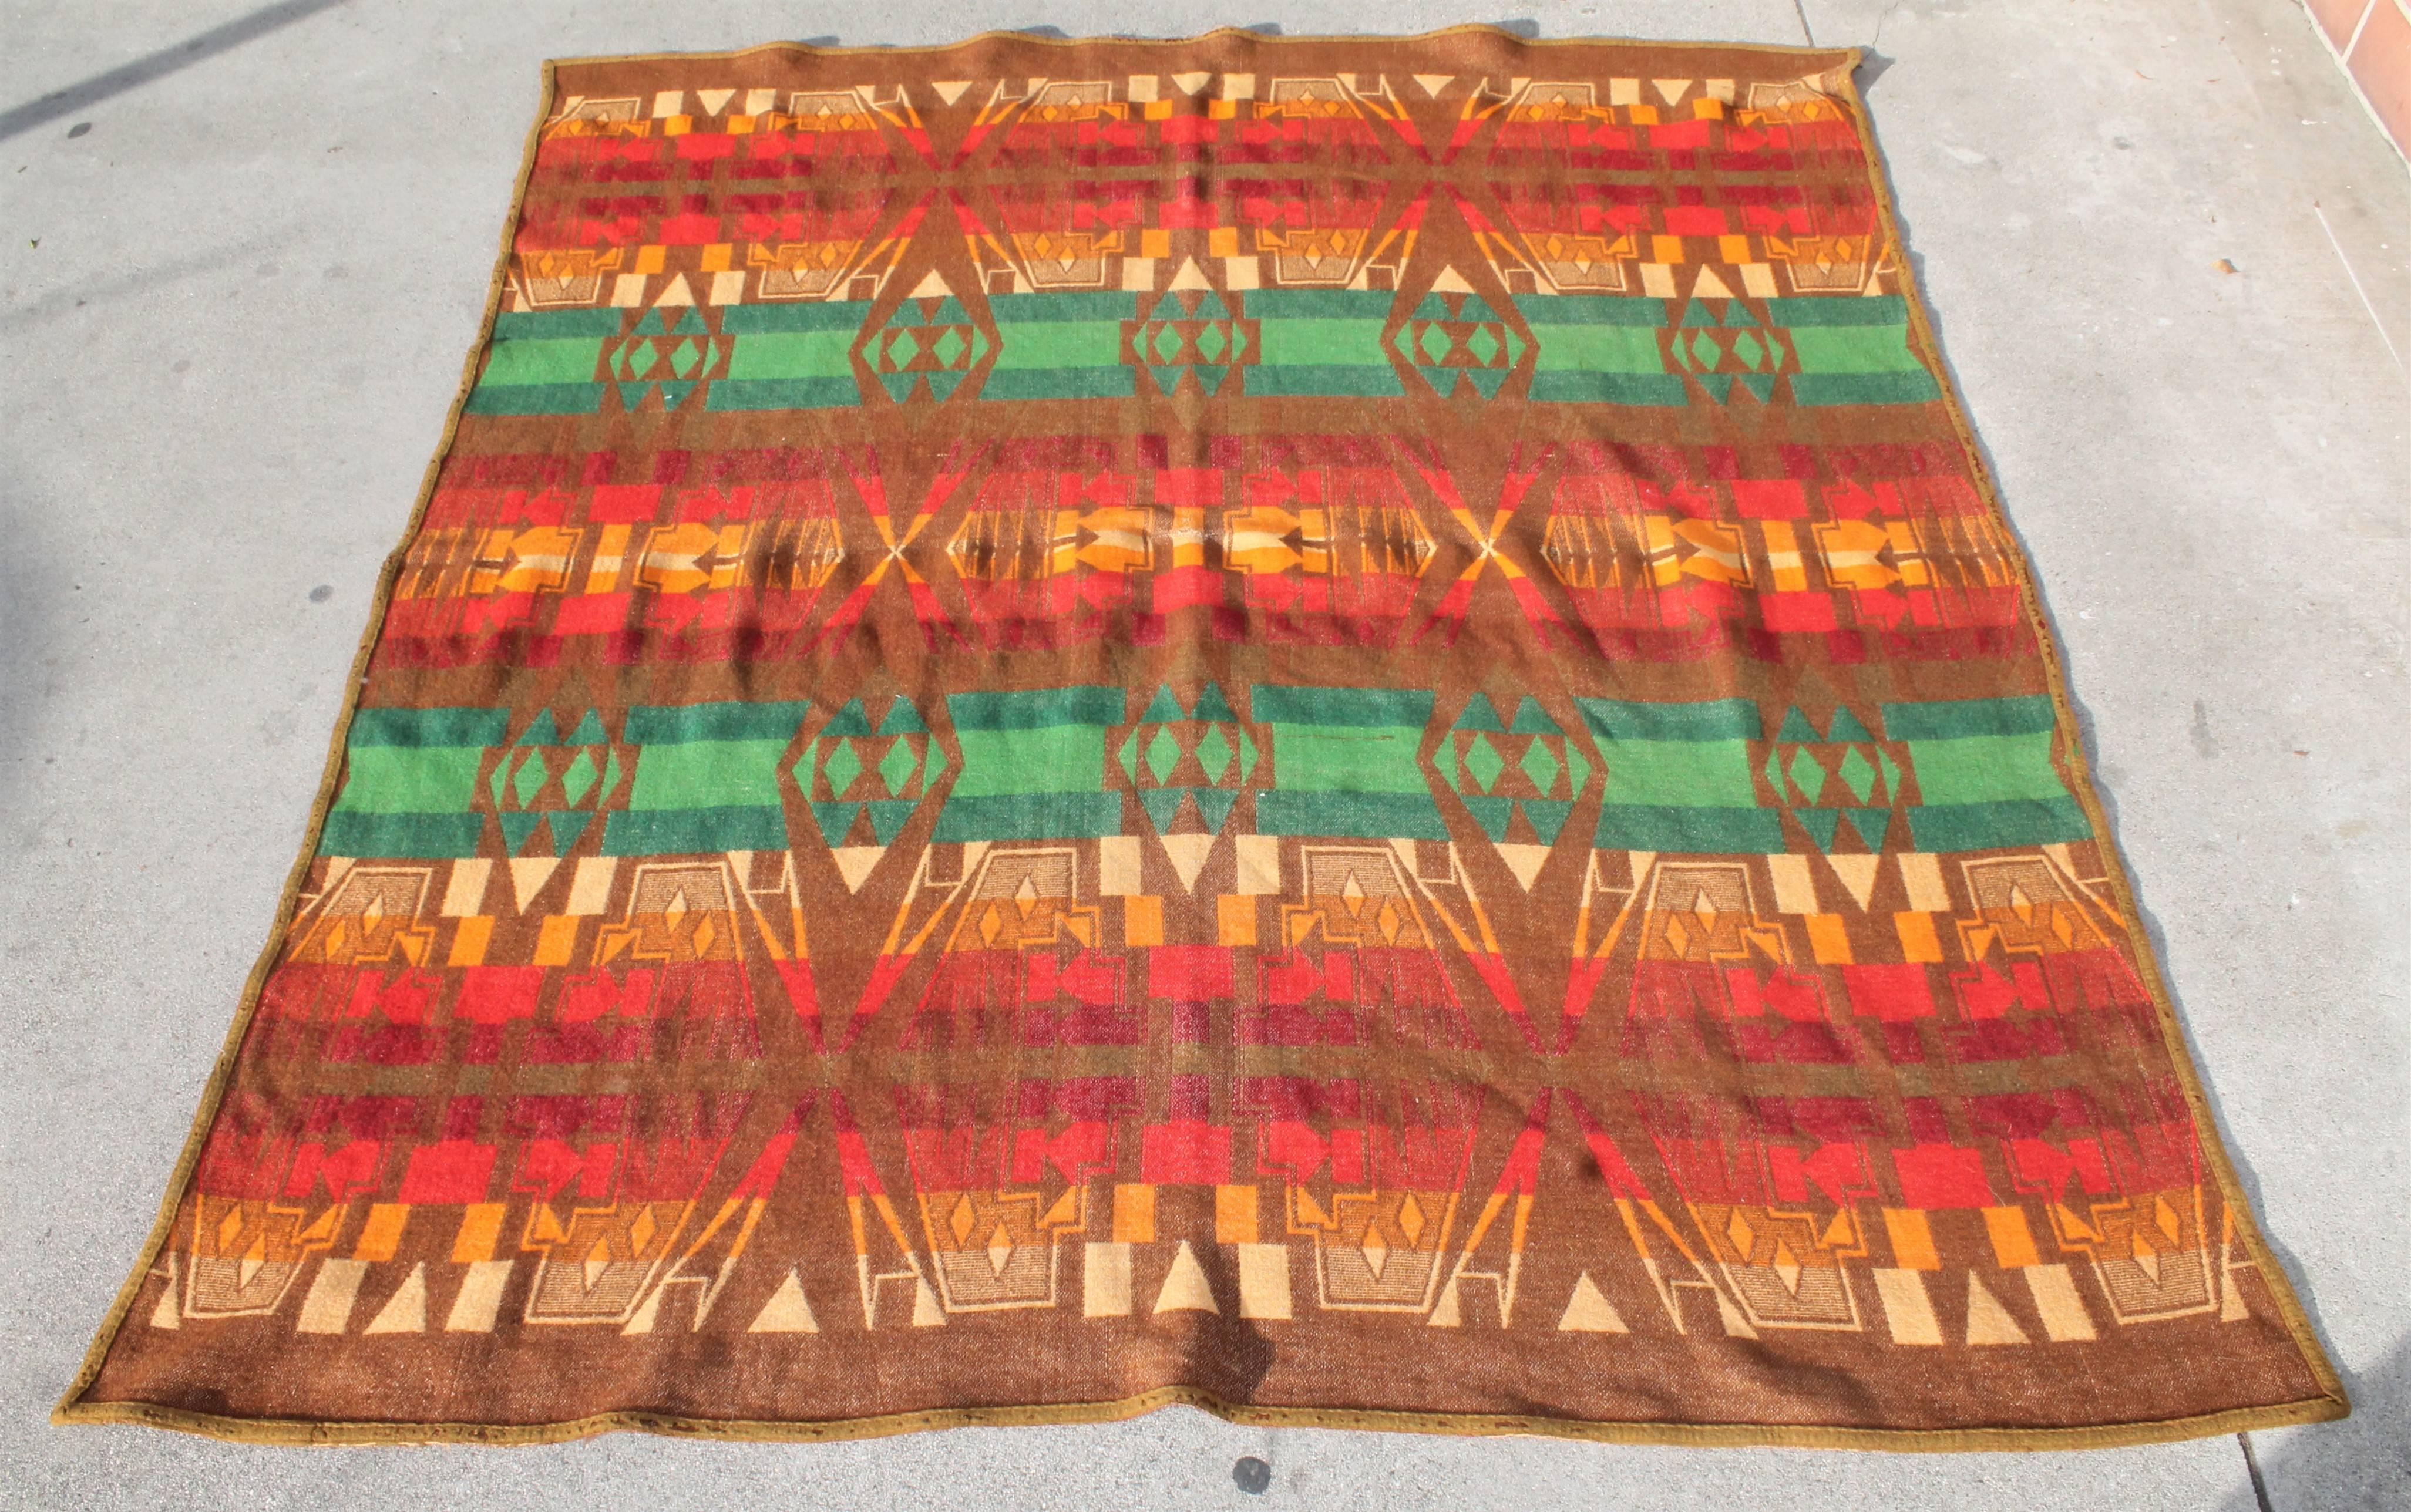 This very early Cayuse / Pendleton wool blanket is in nice condition with a minor repair around the original black label. The colors are soft  like a Indian sunset. It is dated 1919 on the label.